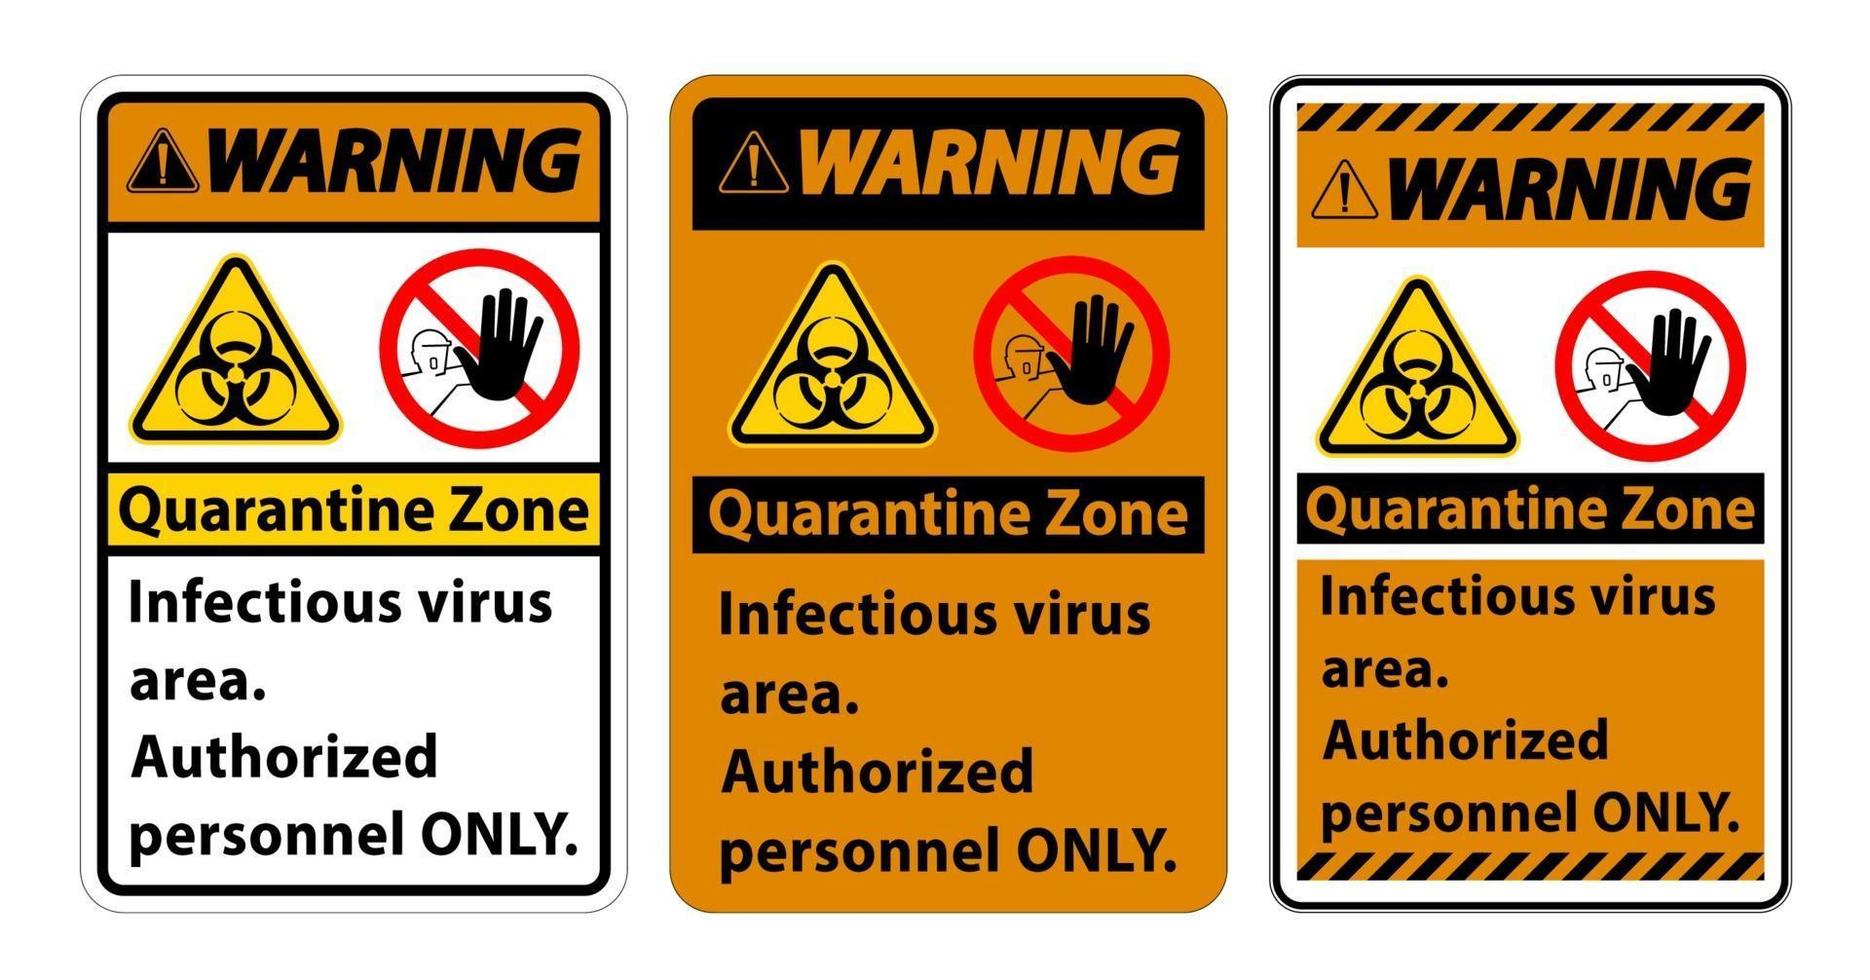 Warning Quarantine Infectious Virus Area sign on white background vector